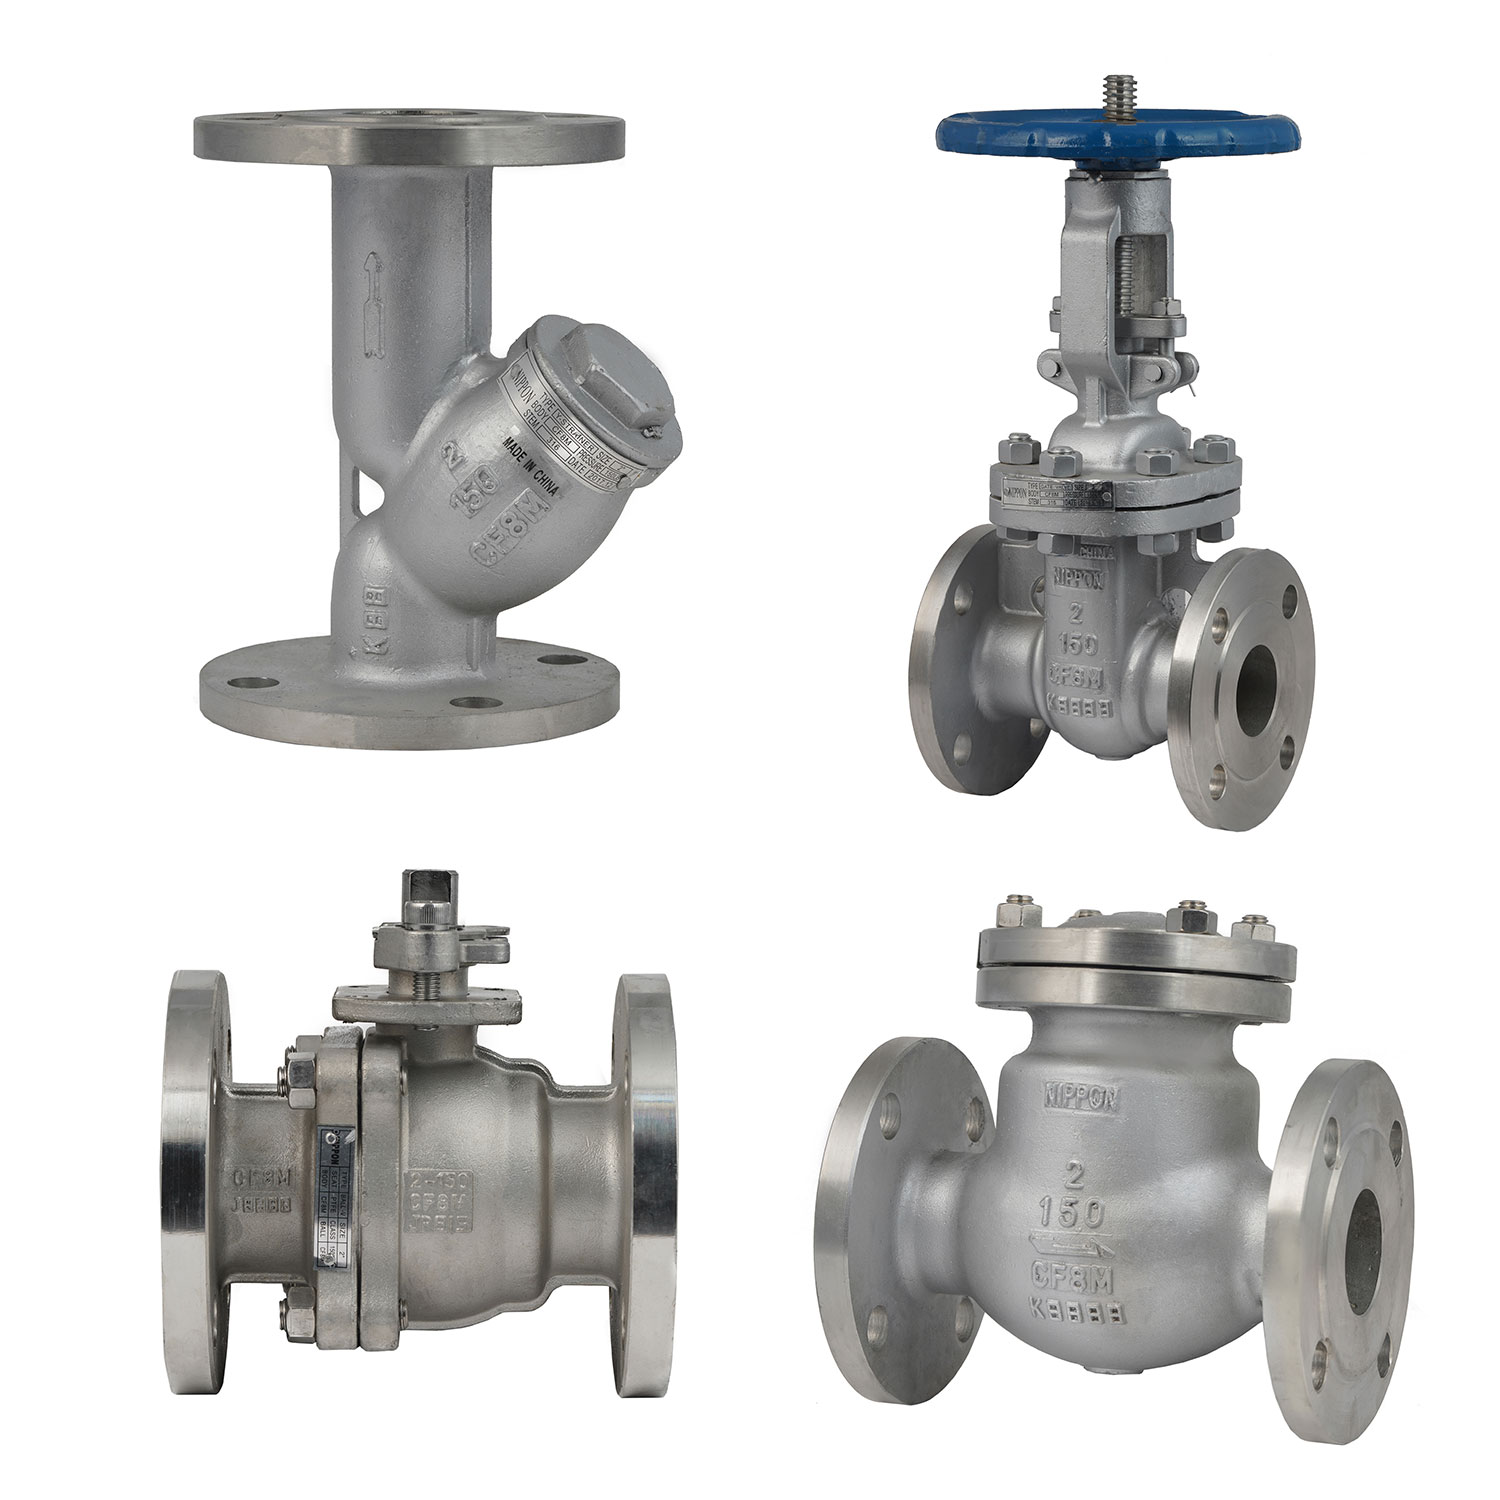 Class 600 Stainless Steel (CF8M) Flanged End Valves with (NIPPON-KITZ-KITZ STEEL) Brands